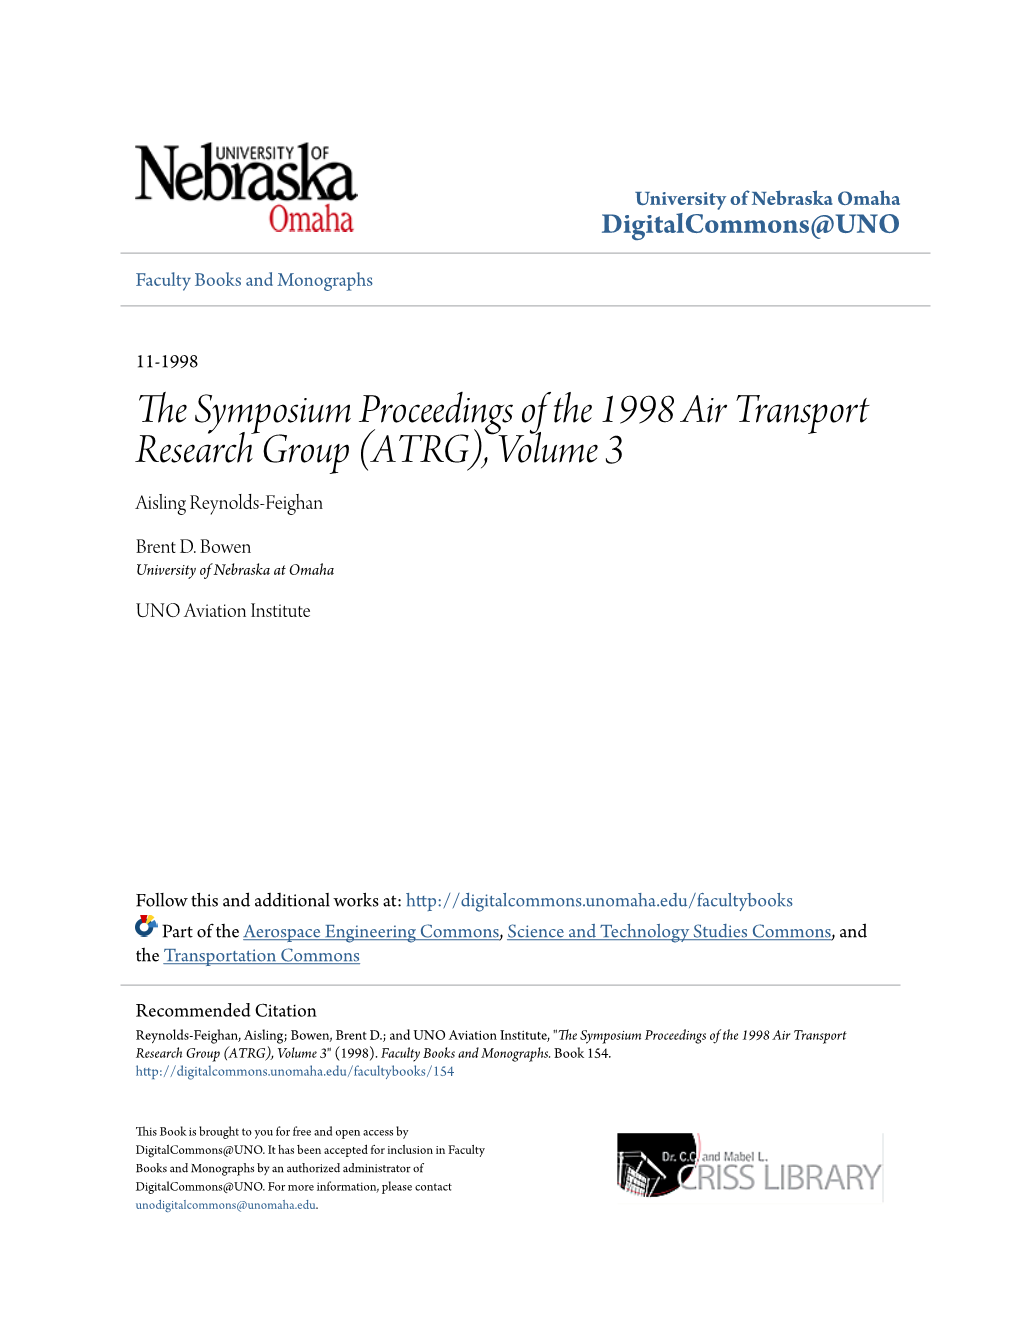 The Symposium Proceedings of the 1998 Air Transport Research Group (ATRG), Volume 3 Aisling Reynolds-Feighan